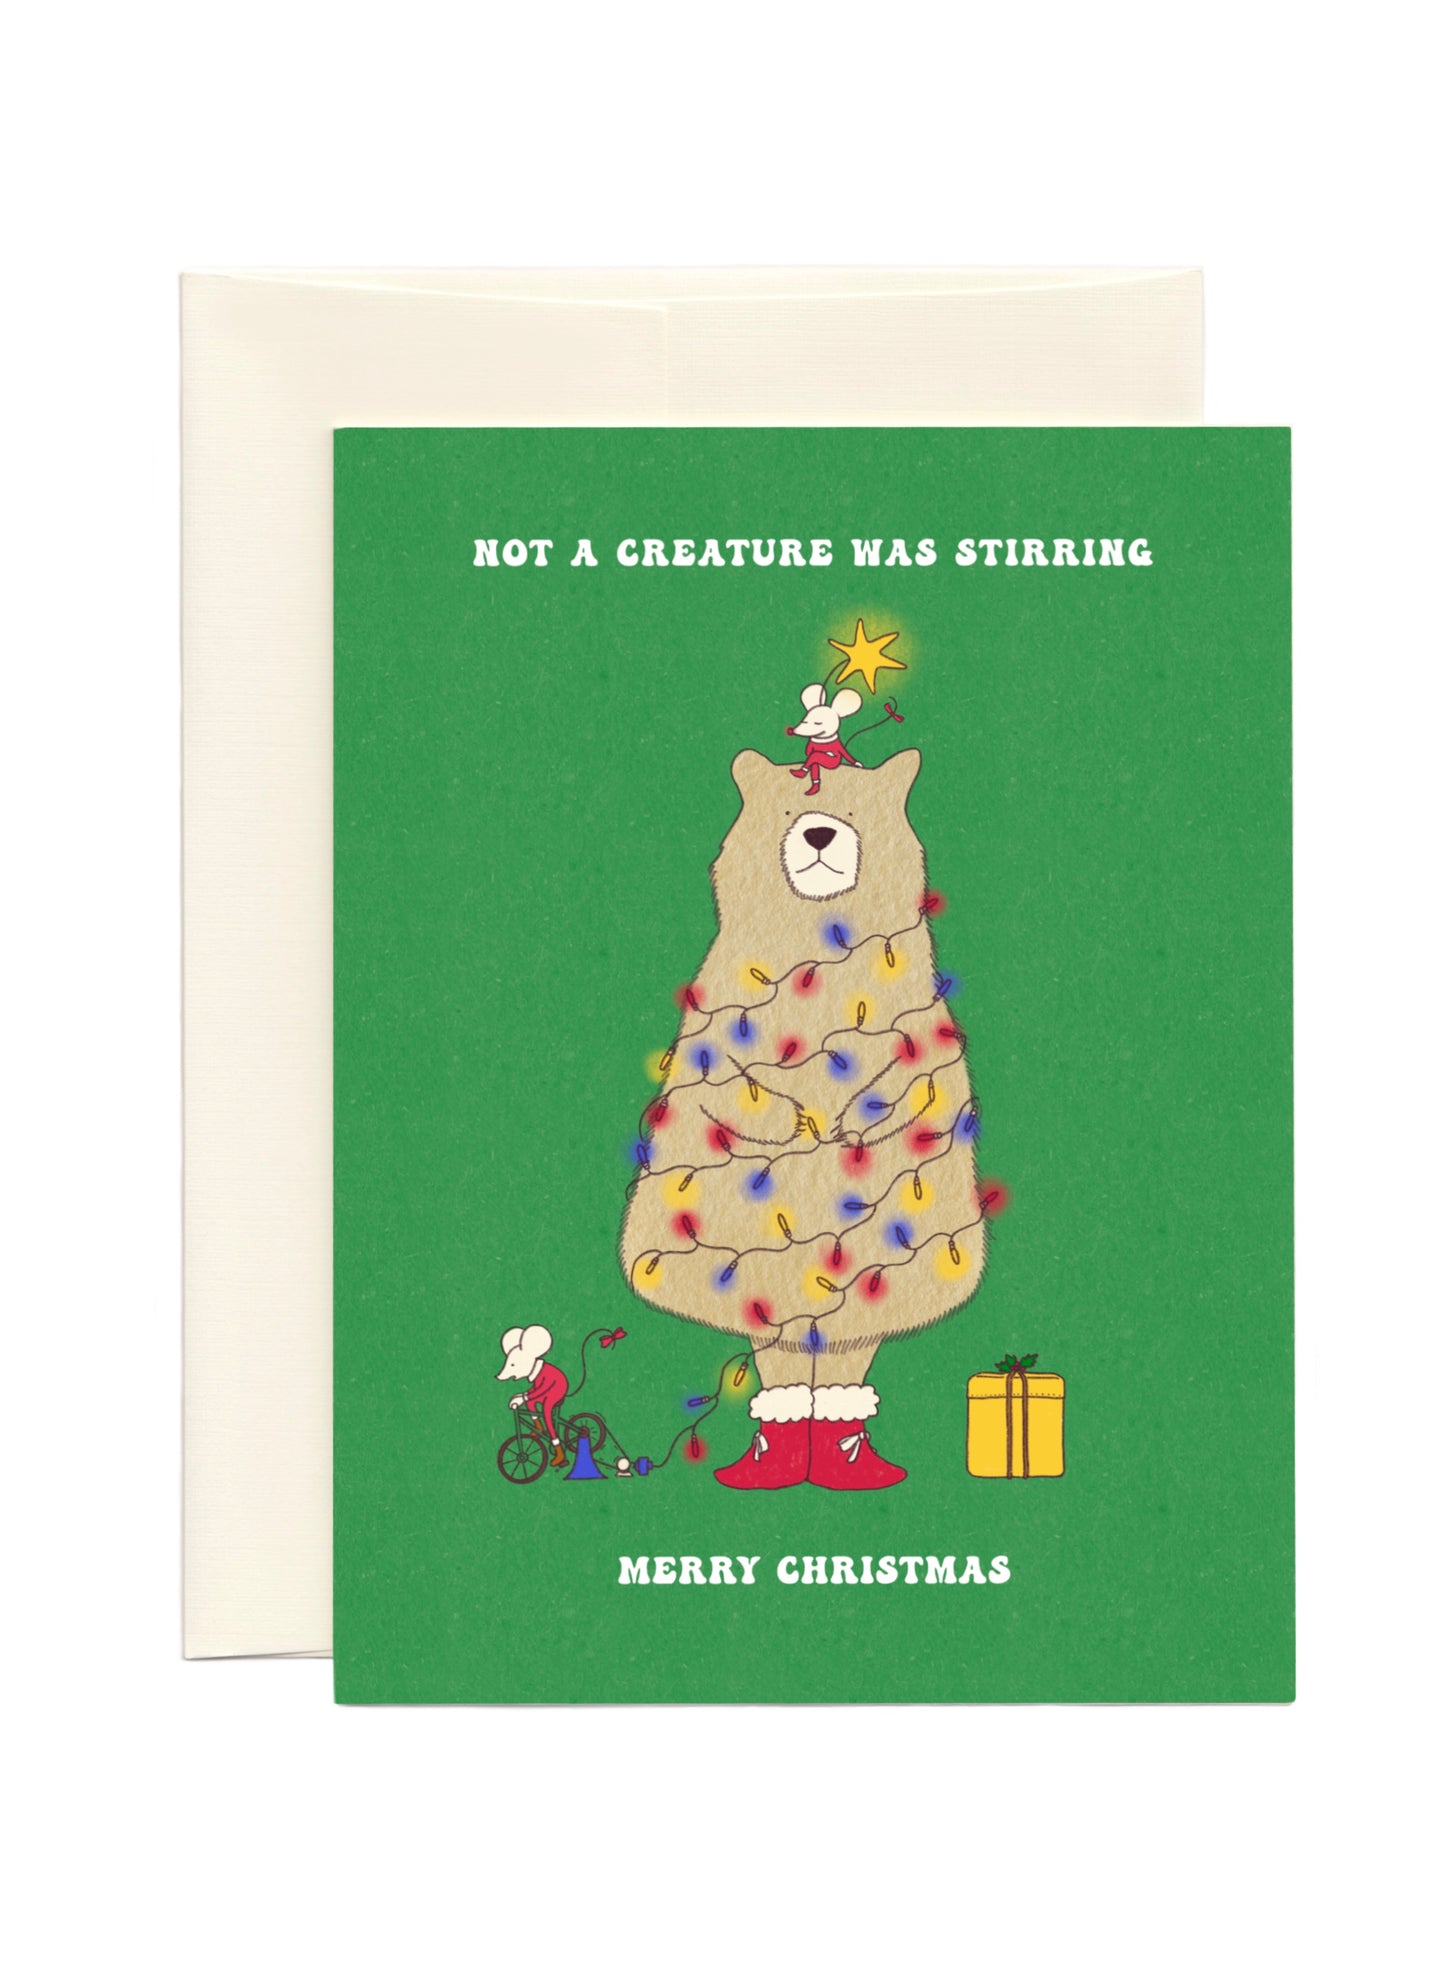 Cute Holiday Card with a bear as a Christmas tree wrapped in lights and two mice around it